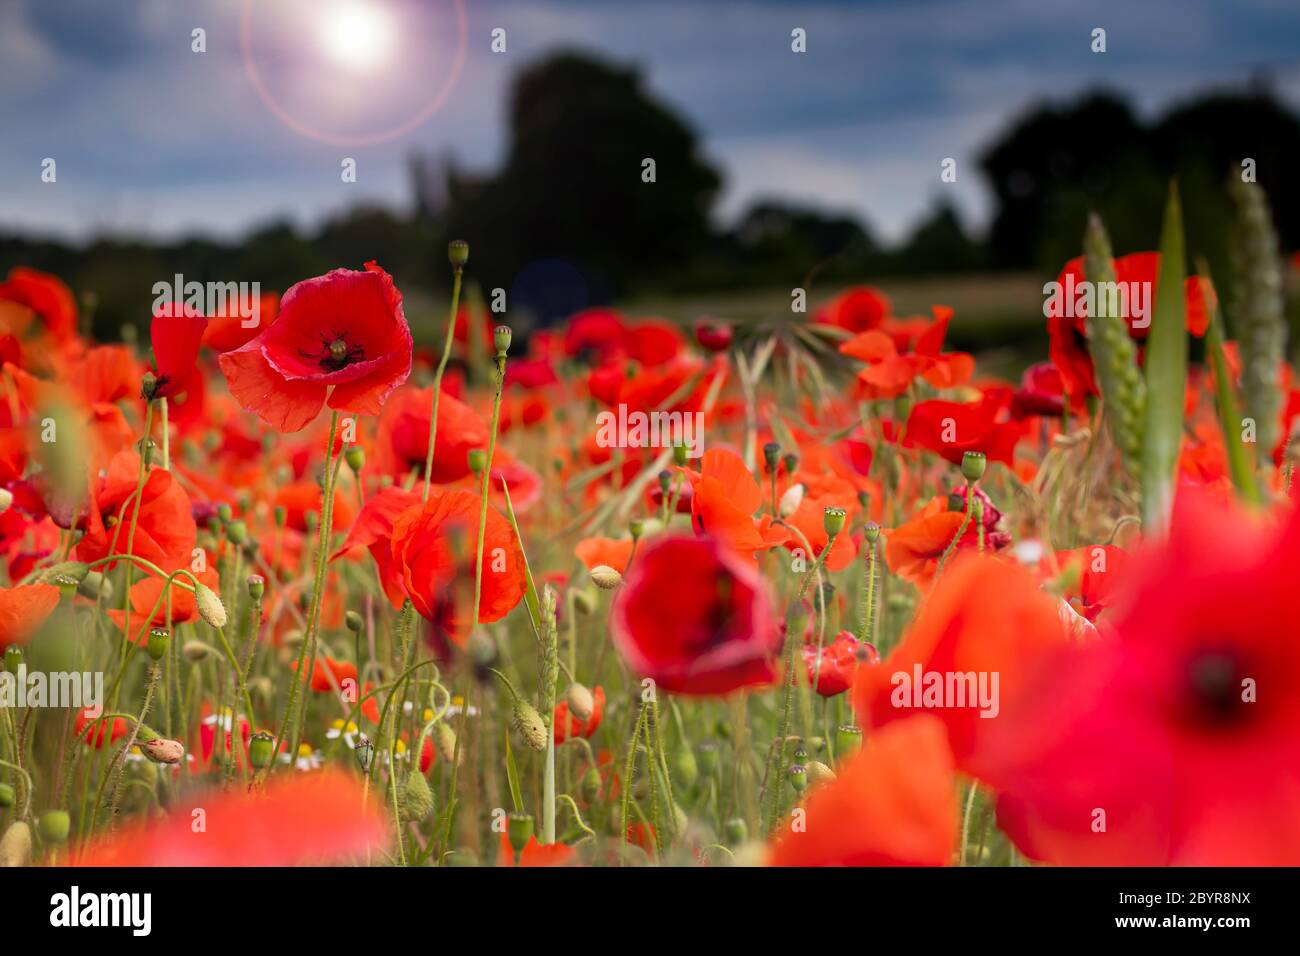 Poppies are now in full bloom in the Staffordshire countryside. This field sits next to a housing estate on the outskirts of Perton, Staffordshire. Credit: Anthony Wallbank/Alamy Live News Stock Photo